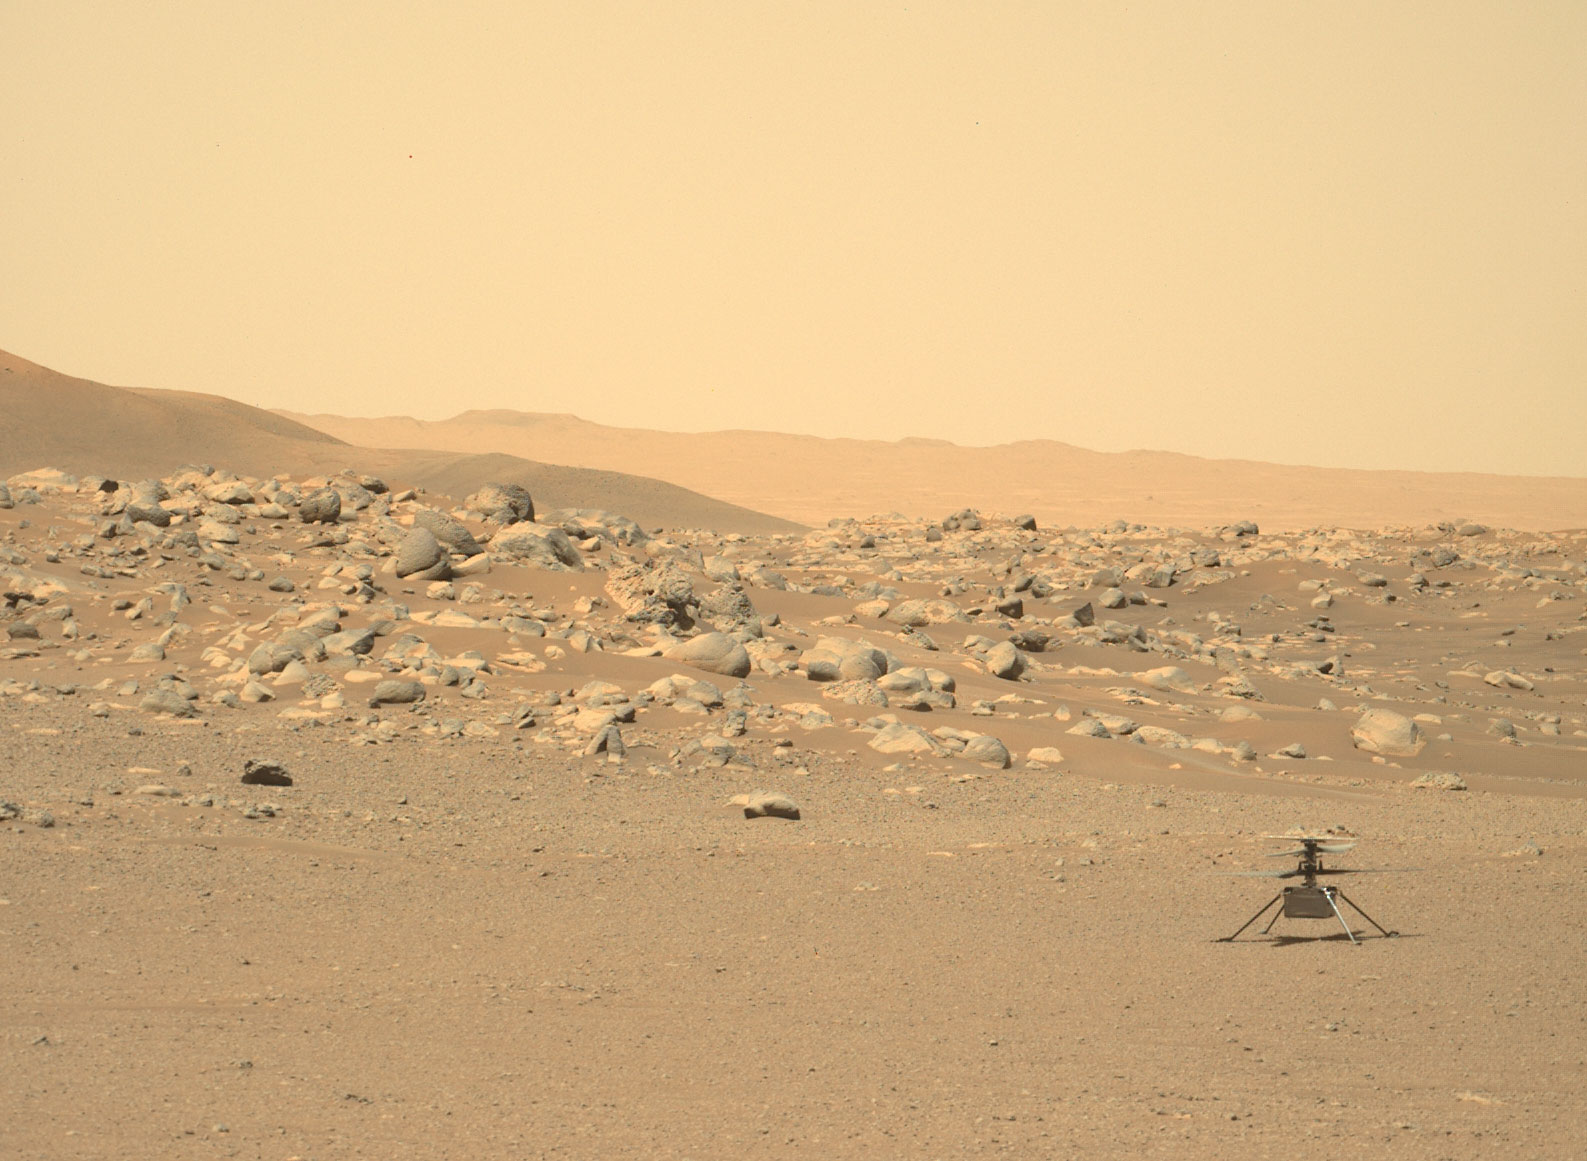 NASA's Mars Perseverance rover acquired this image using its Left Mastcam-Z camera. It displays the helicopter on the ground sitting on the sandy surface of Mars with rocks and hills in the background.